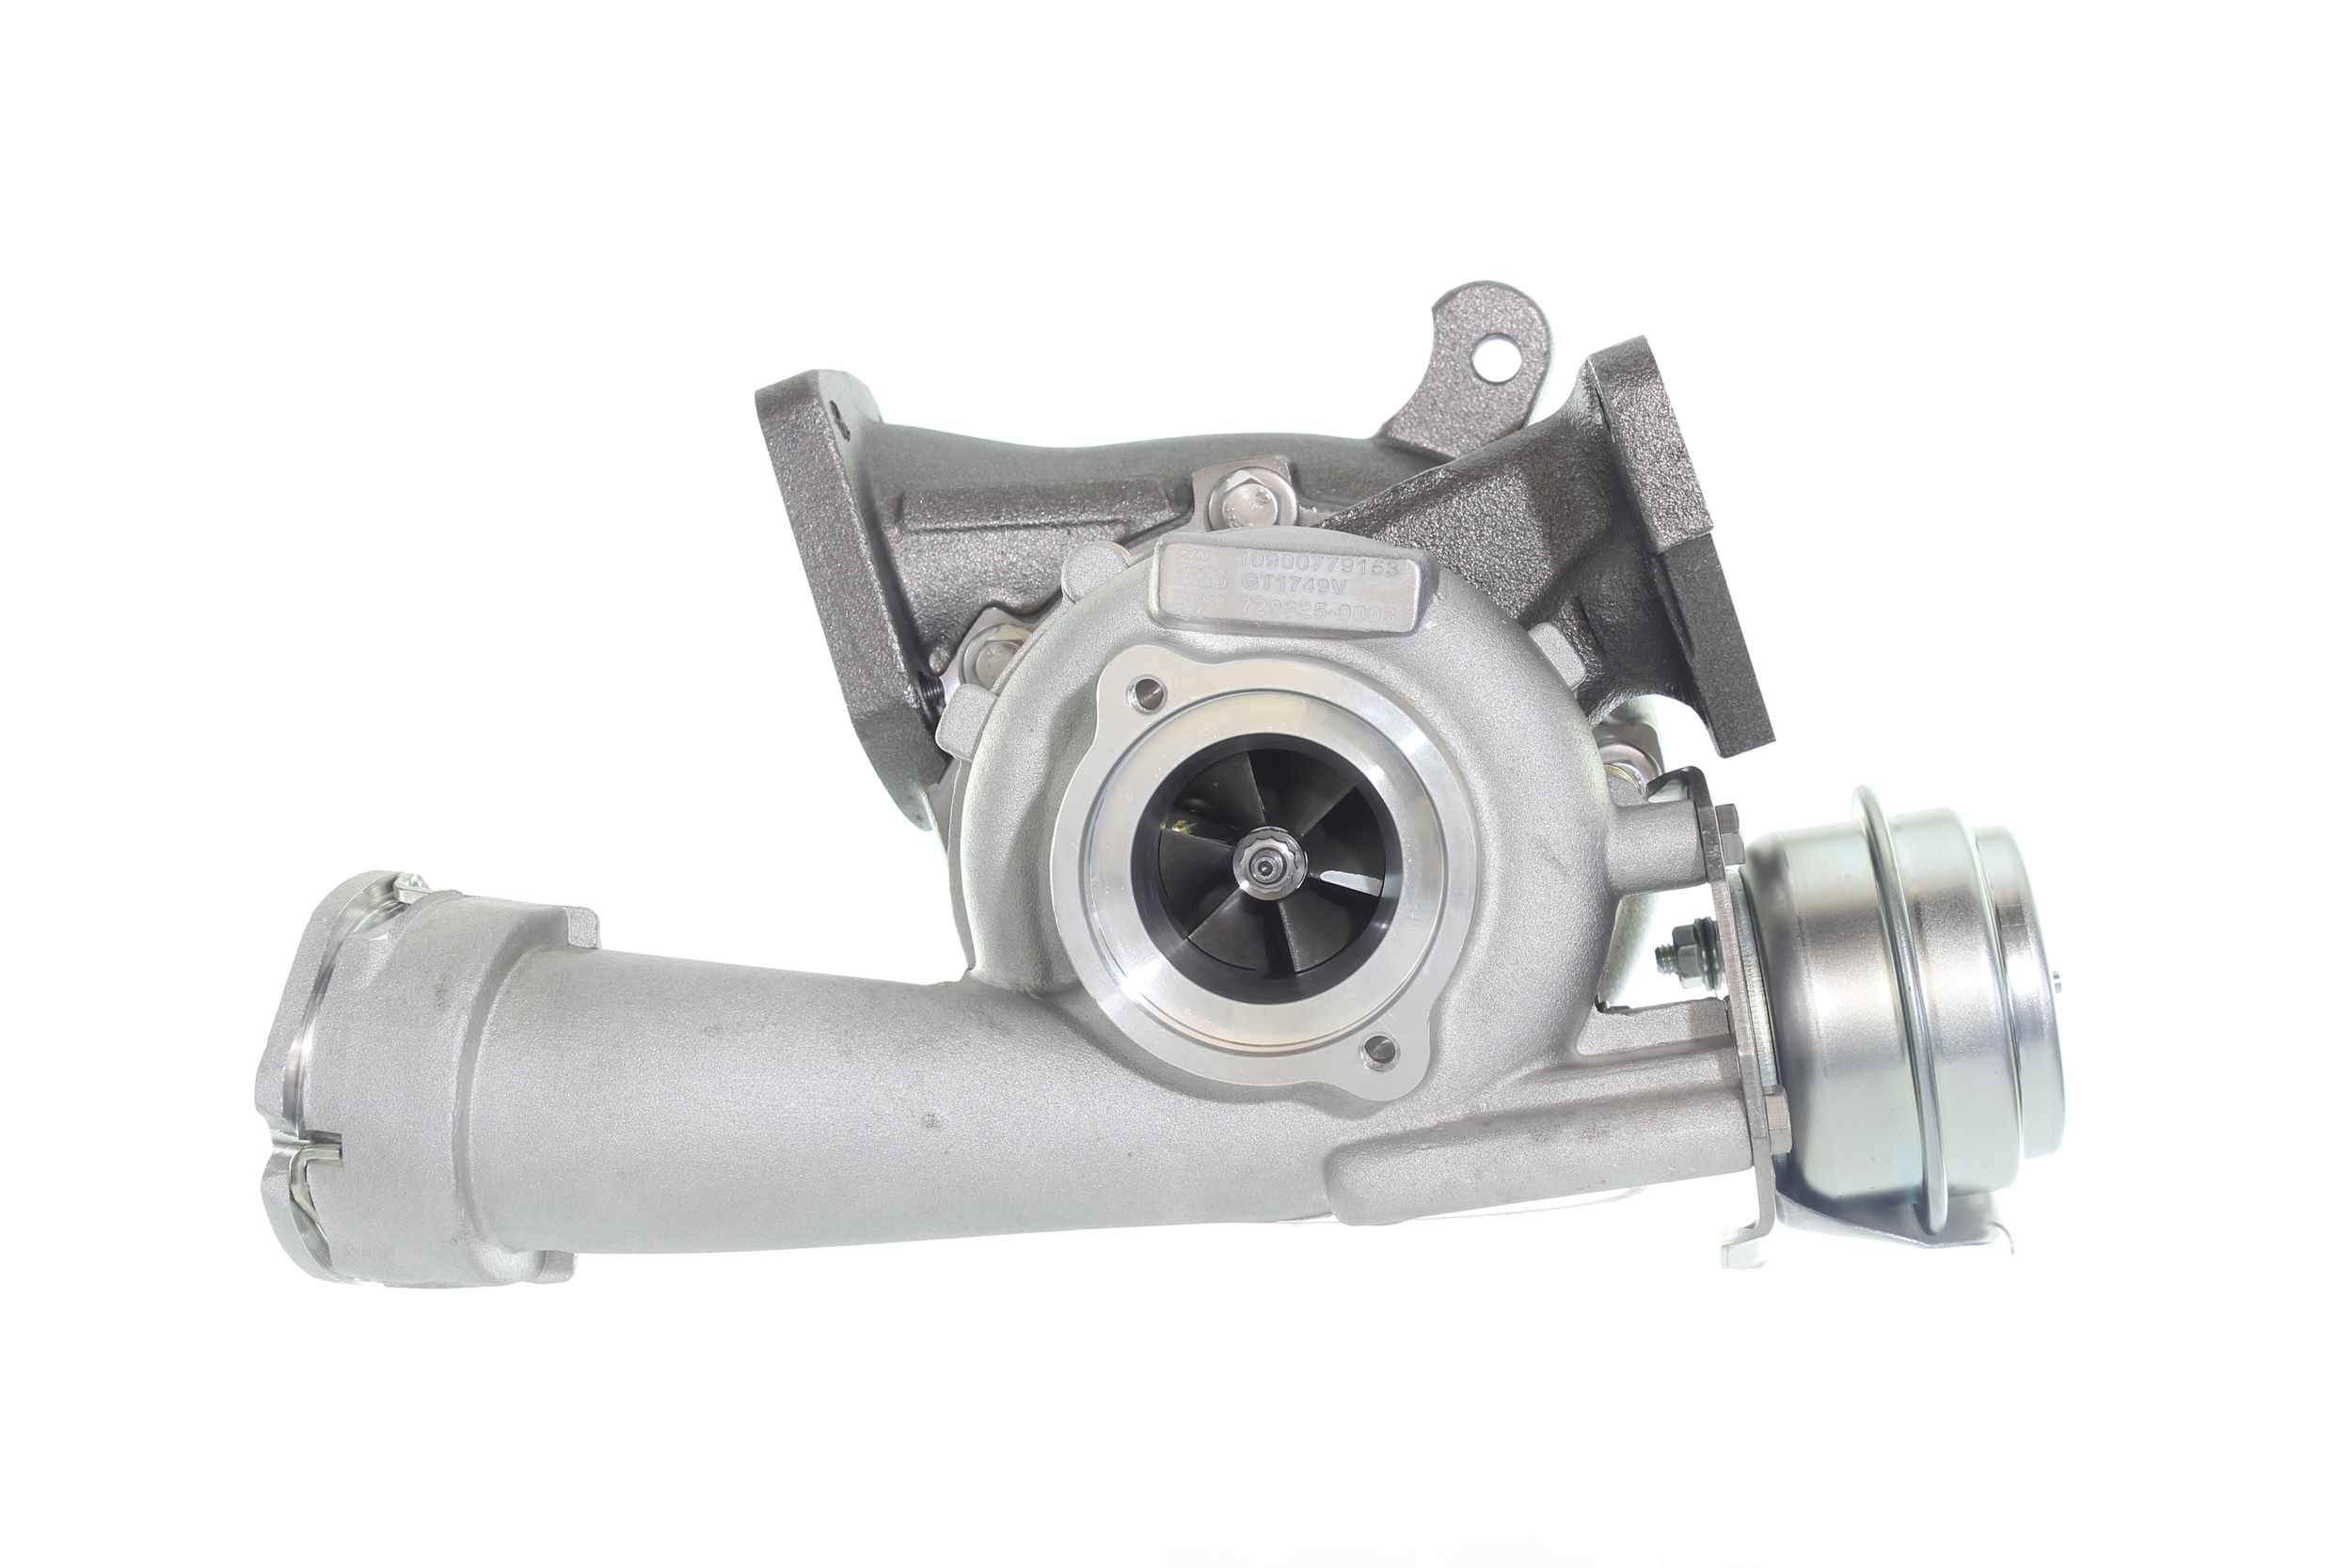 10900779 ALANKO Turbocharger RENAULT Exhaust Turbocharger, Euro 3, Incl. Gasket Set, with attachment material